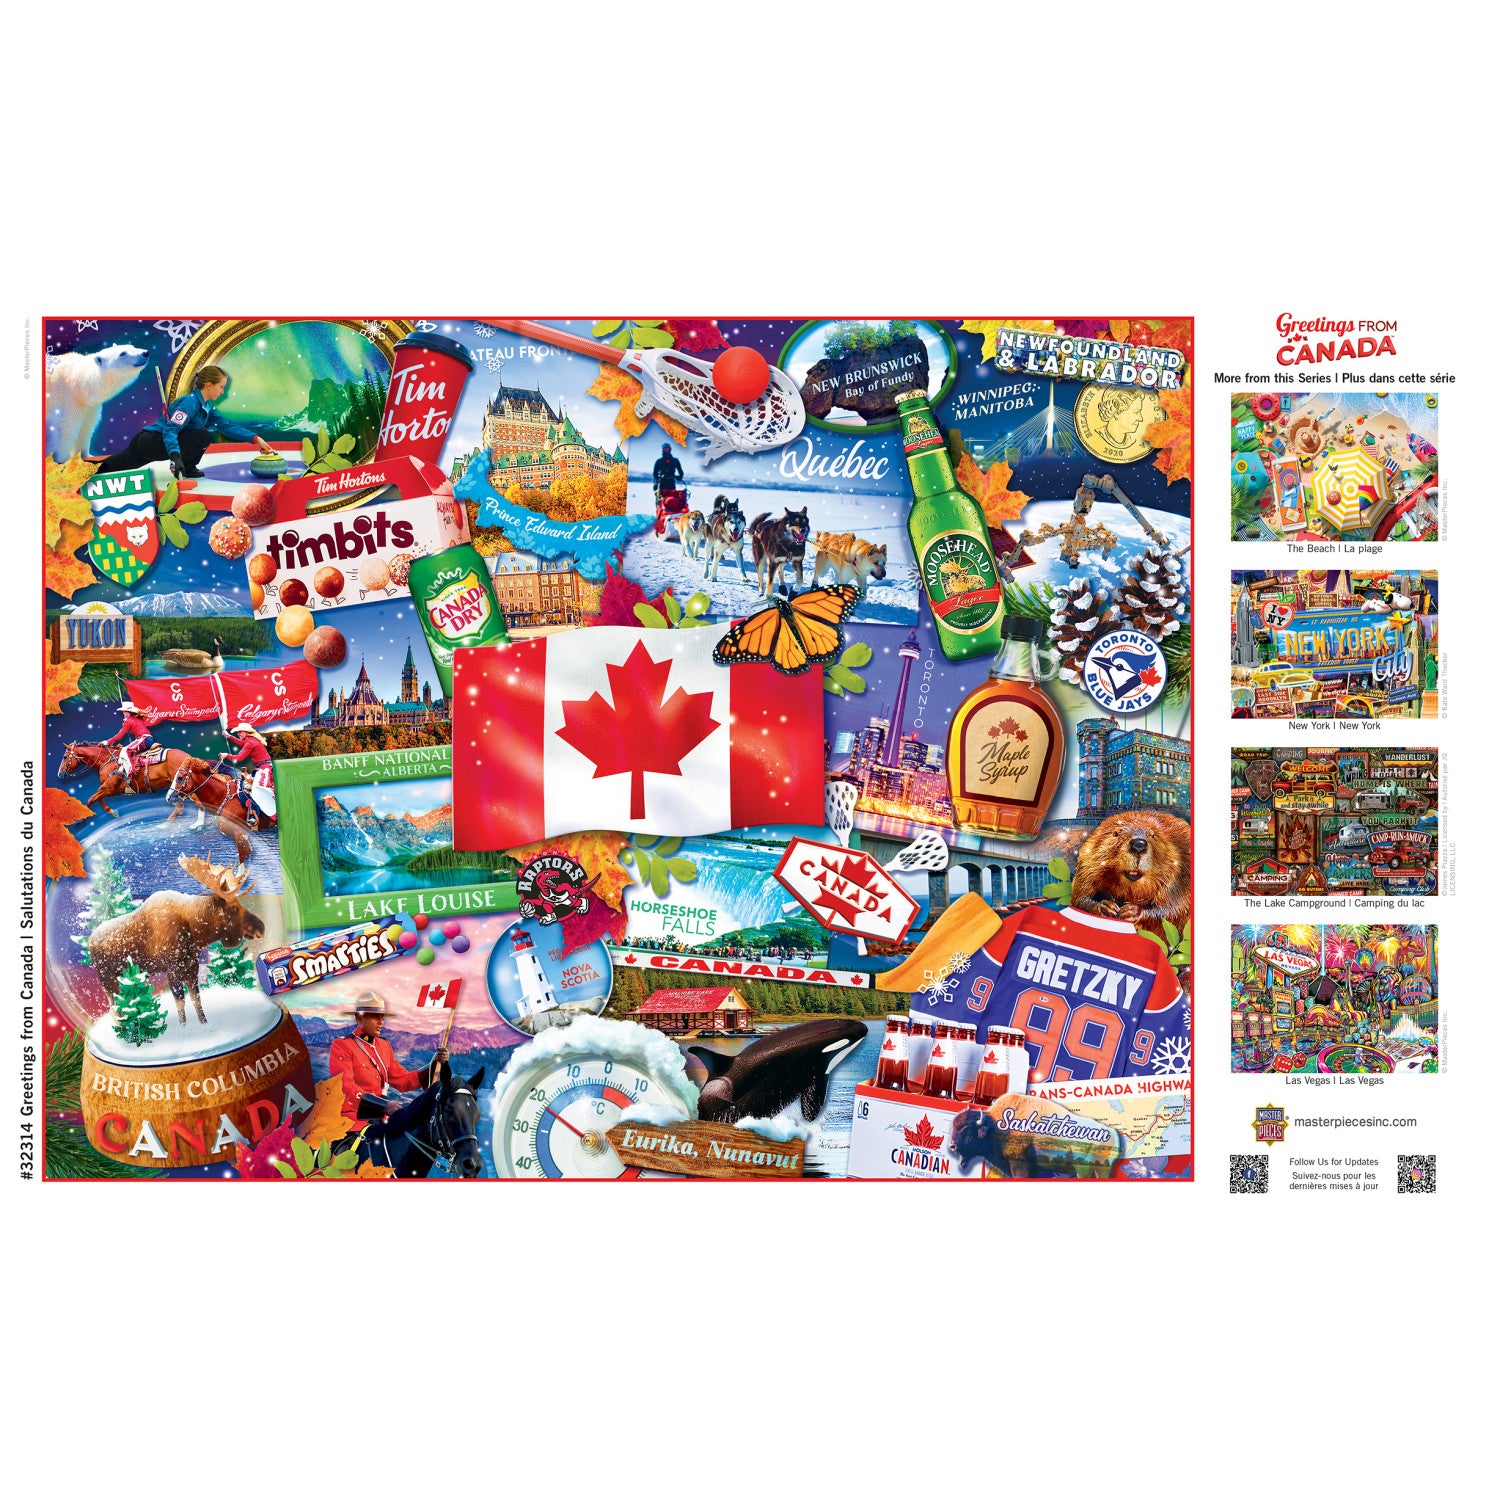 Greetings From Canada - 550 Piece Puzzle